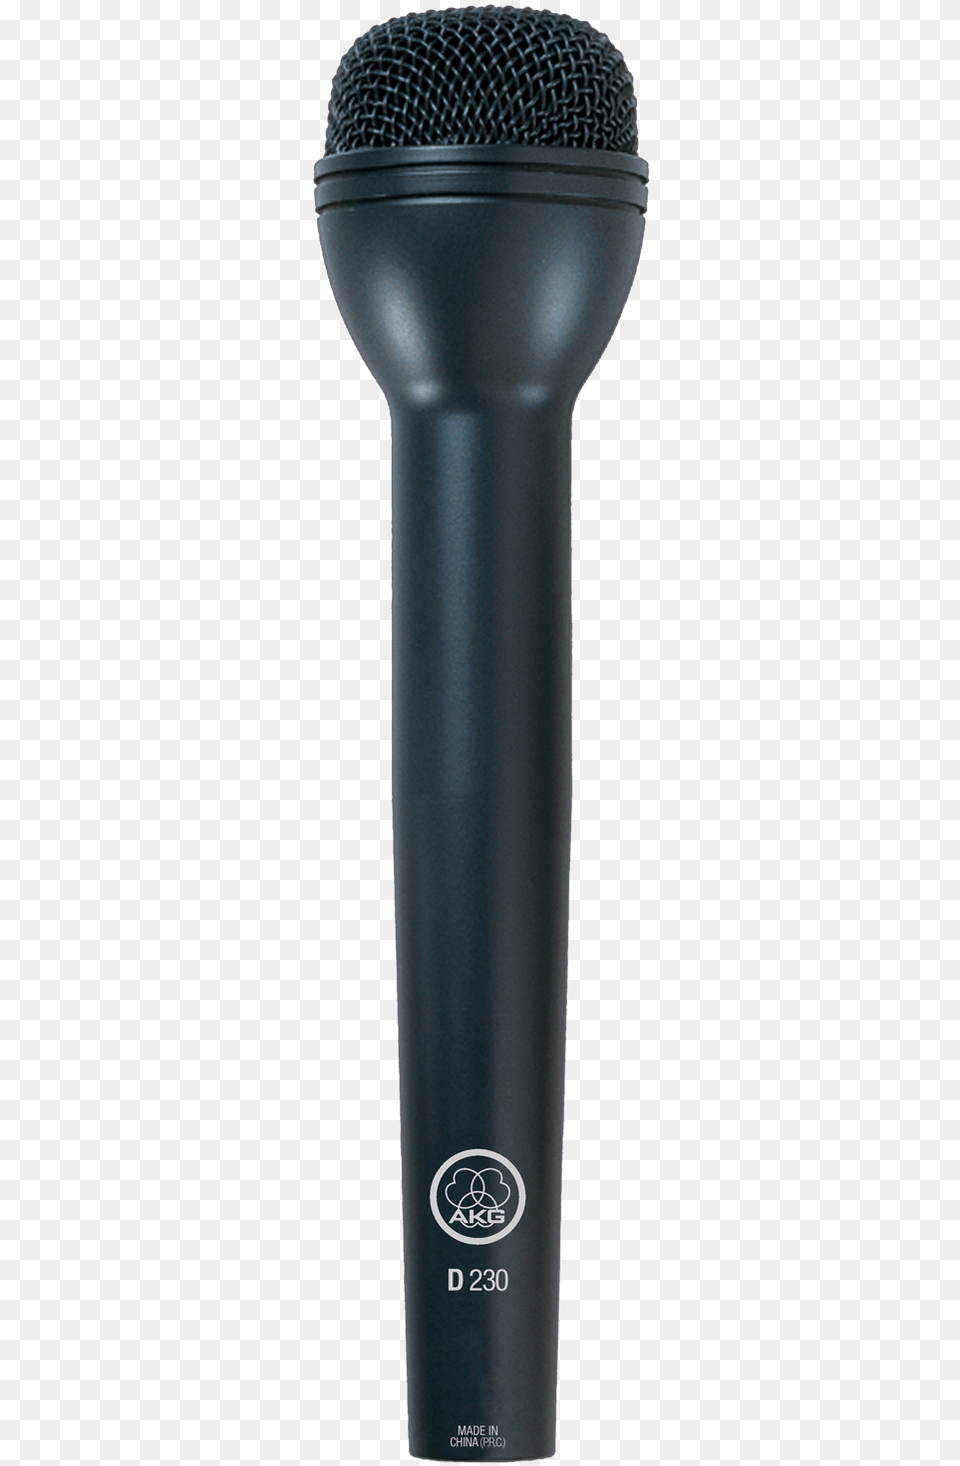 Akg, Electrical Device, Microphone Free Transparent Png